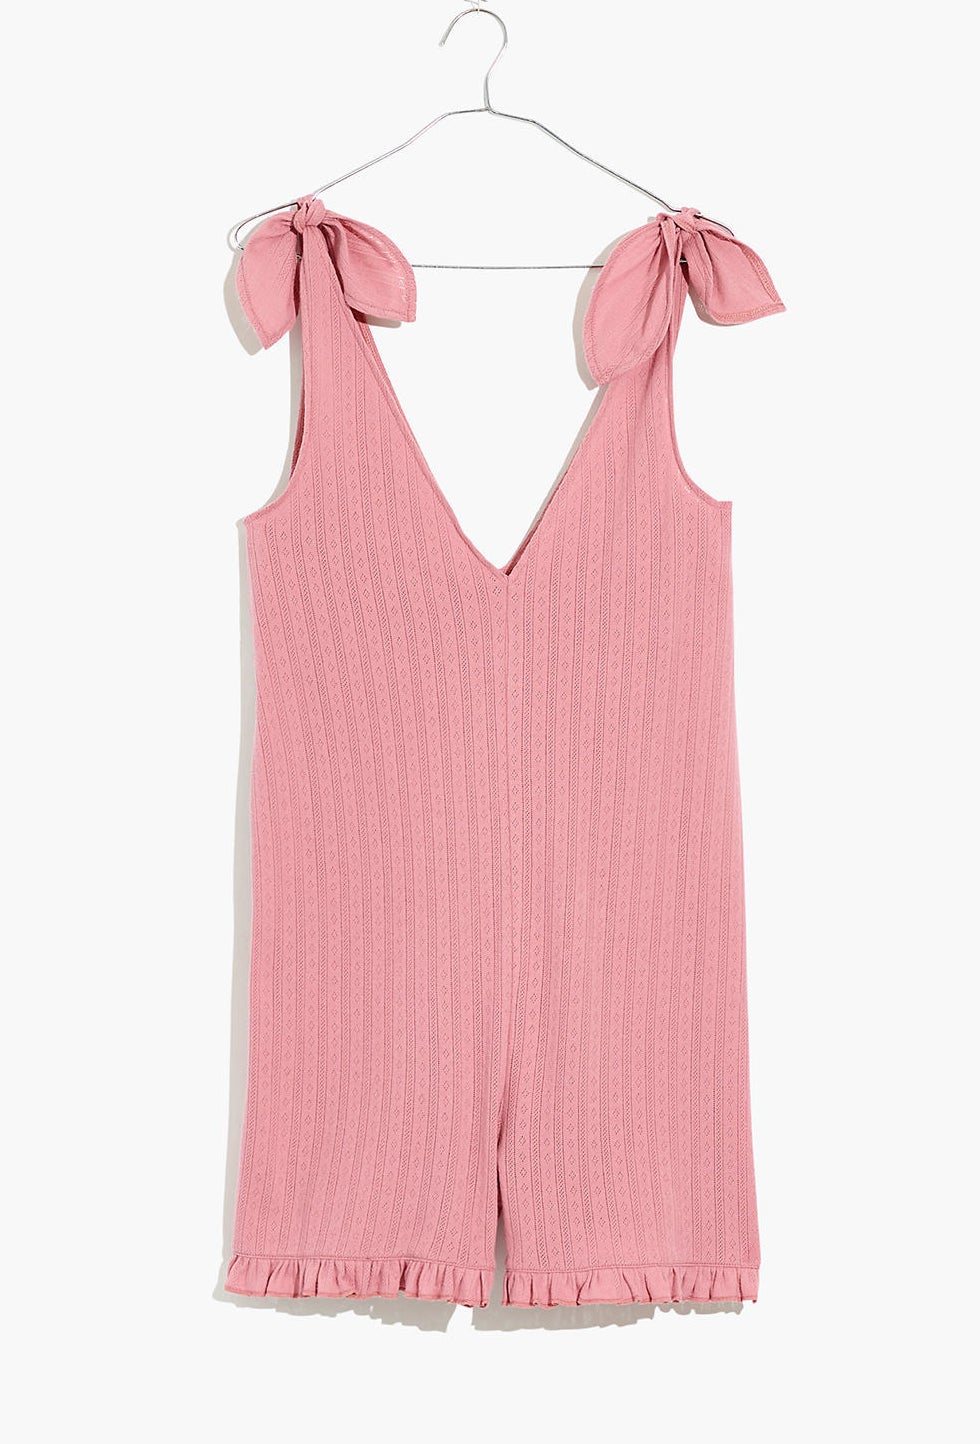 pink knit short romper with tank top bow sleeves and ruffles on the leg